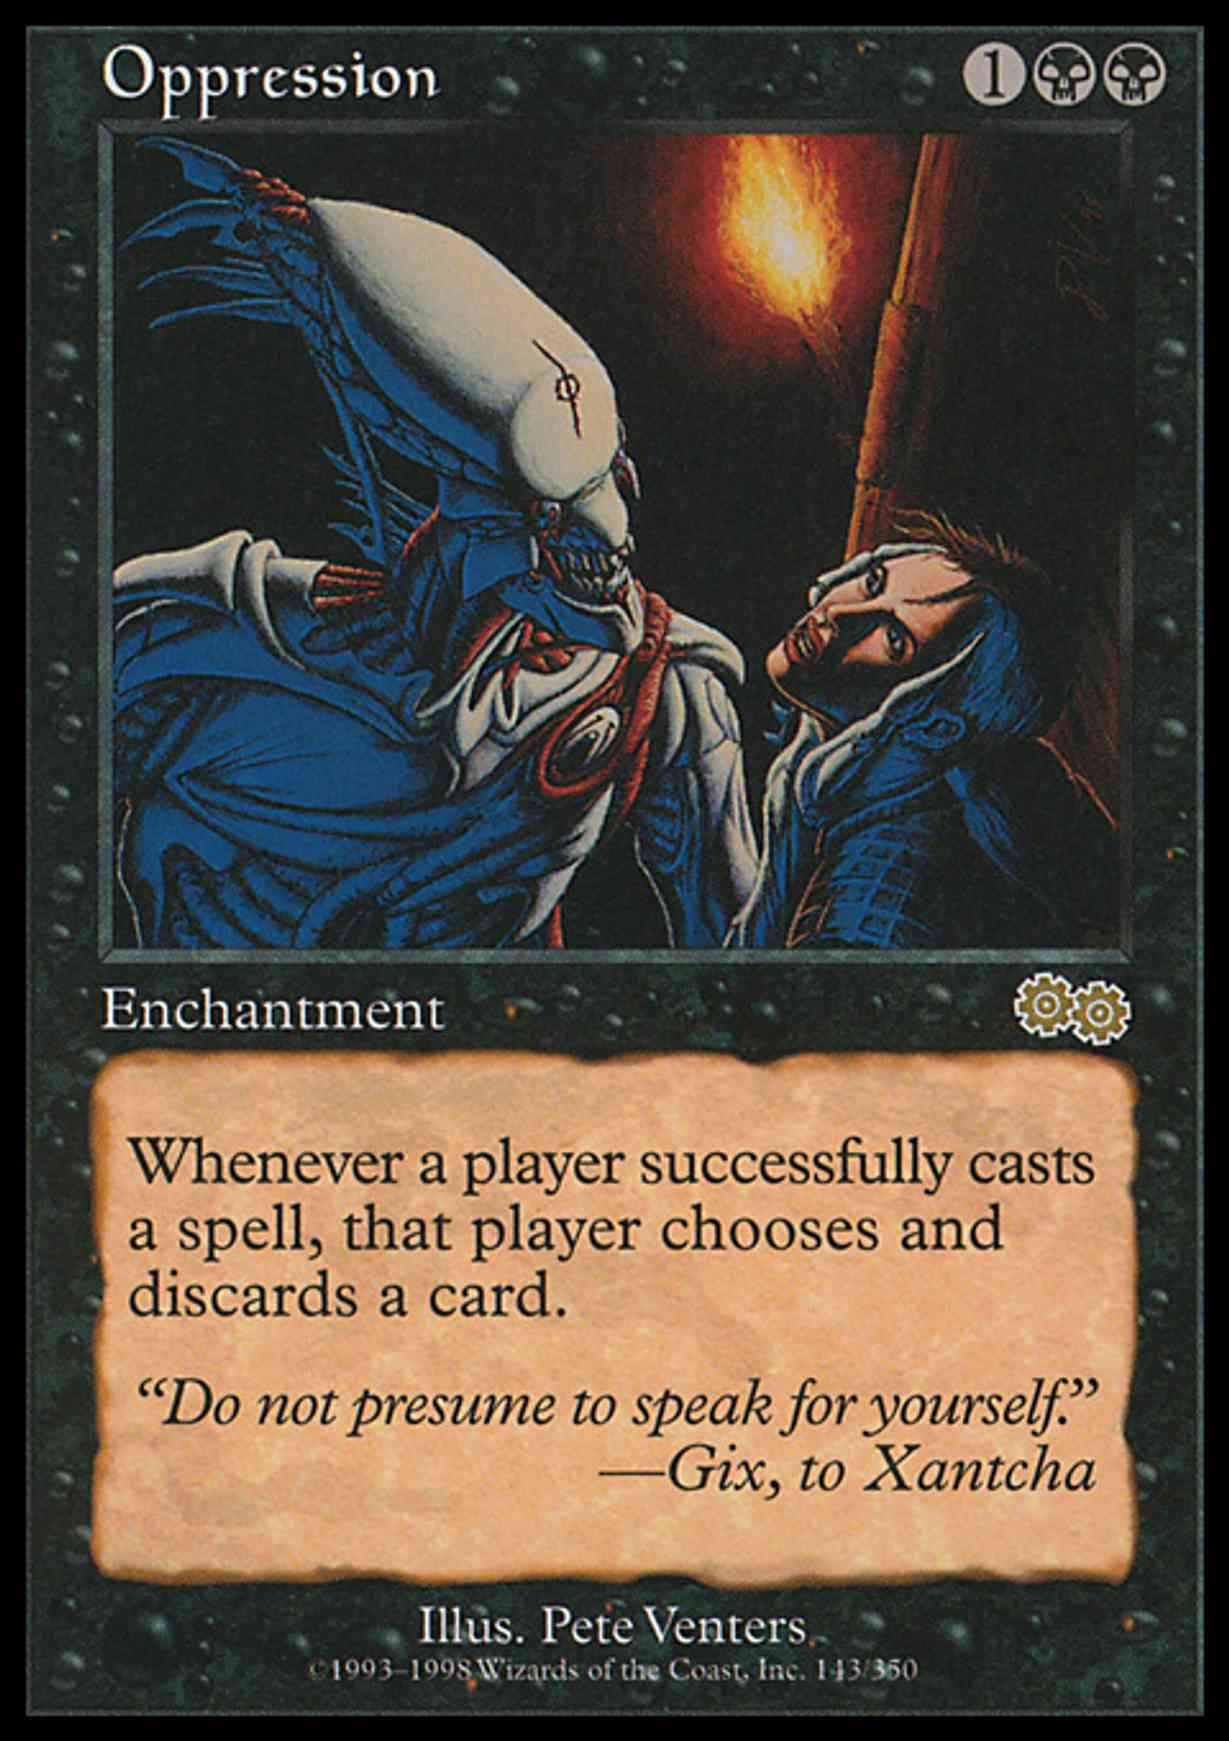 Oppression magic card front